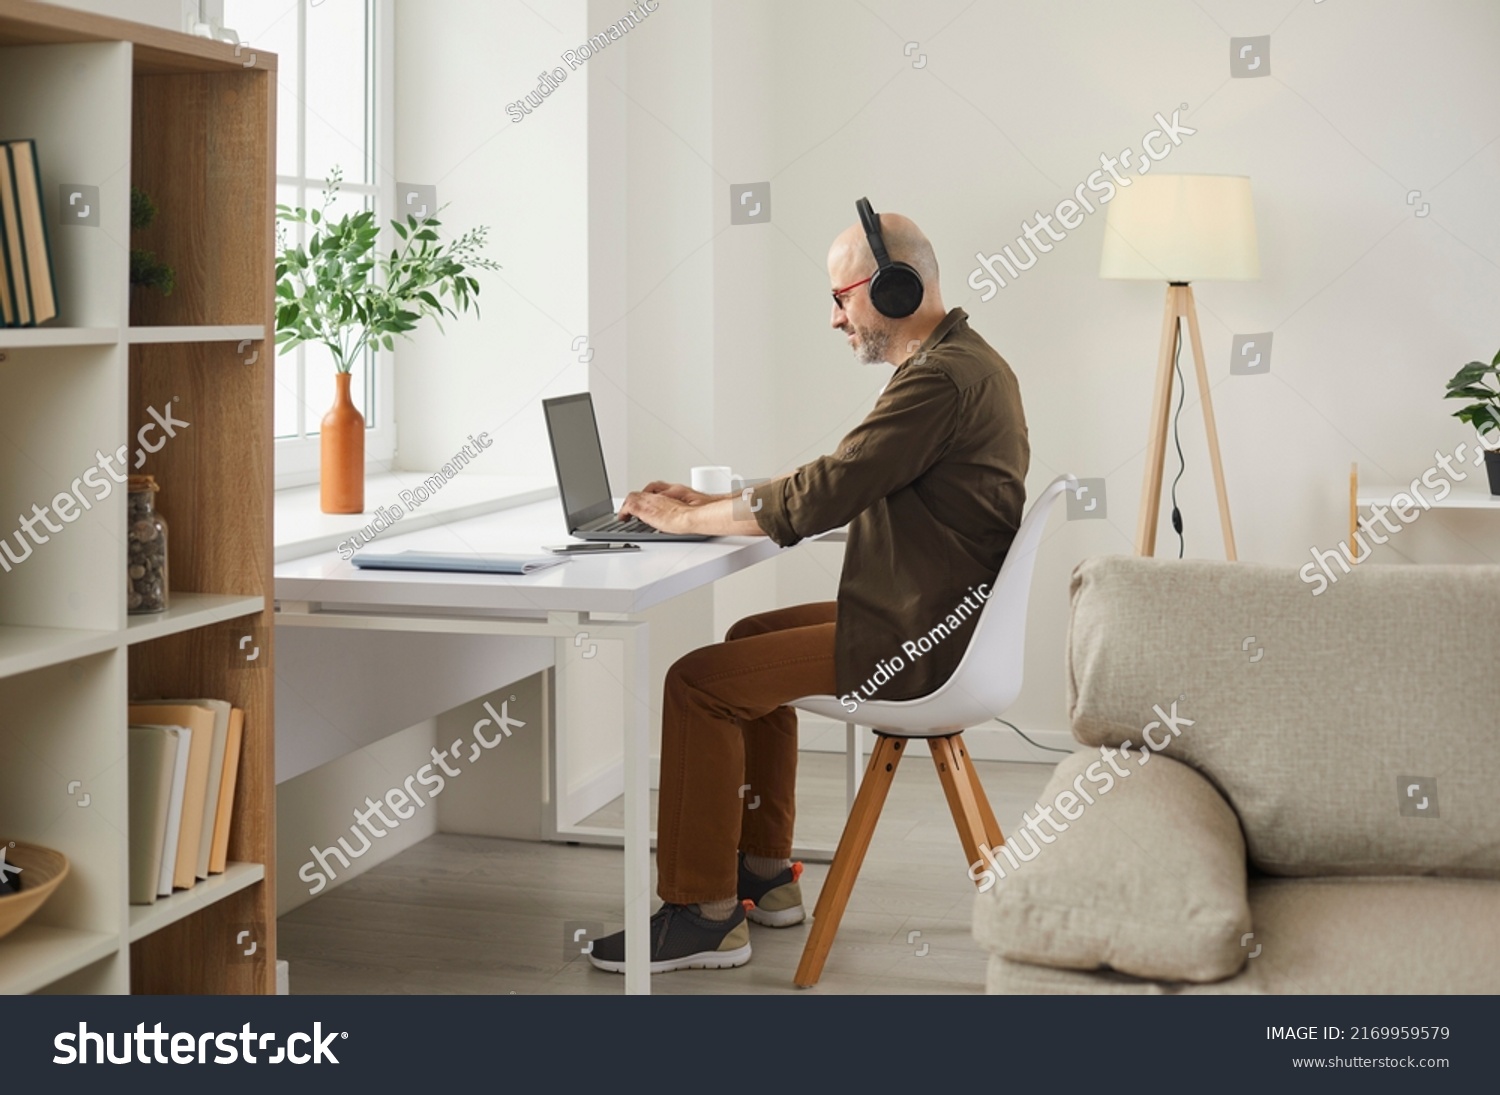 Smiling adult man listening to music on headphones while working on laptop at home. Side view of middle-aged man listening to his favorite music, searching information on Internet or making video call #2169959579